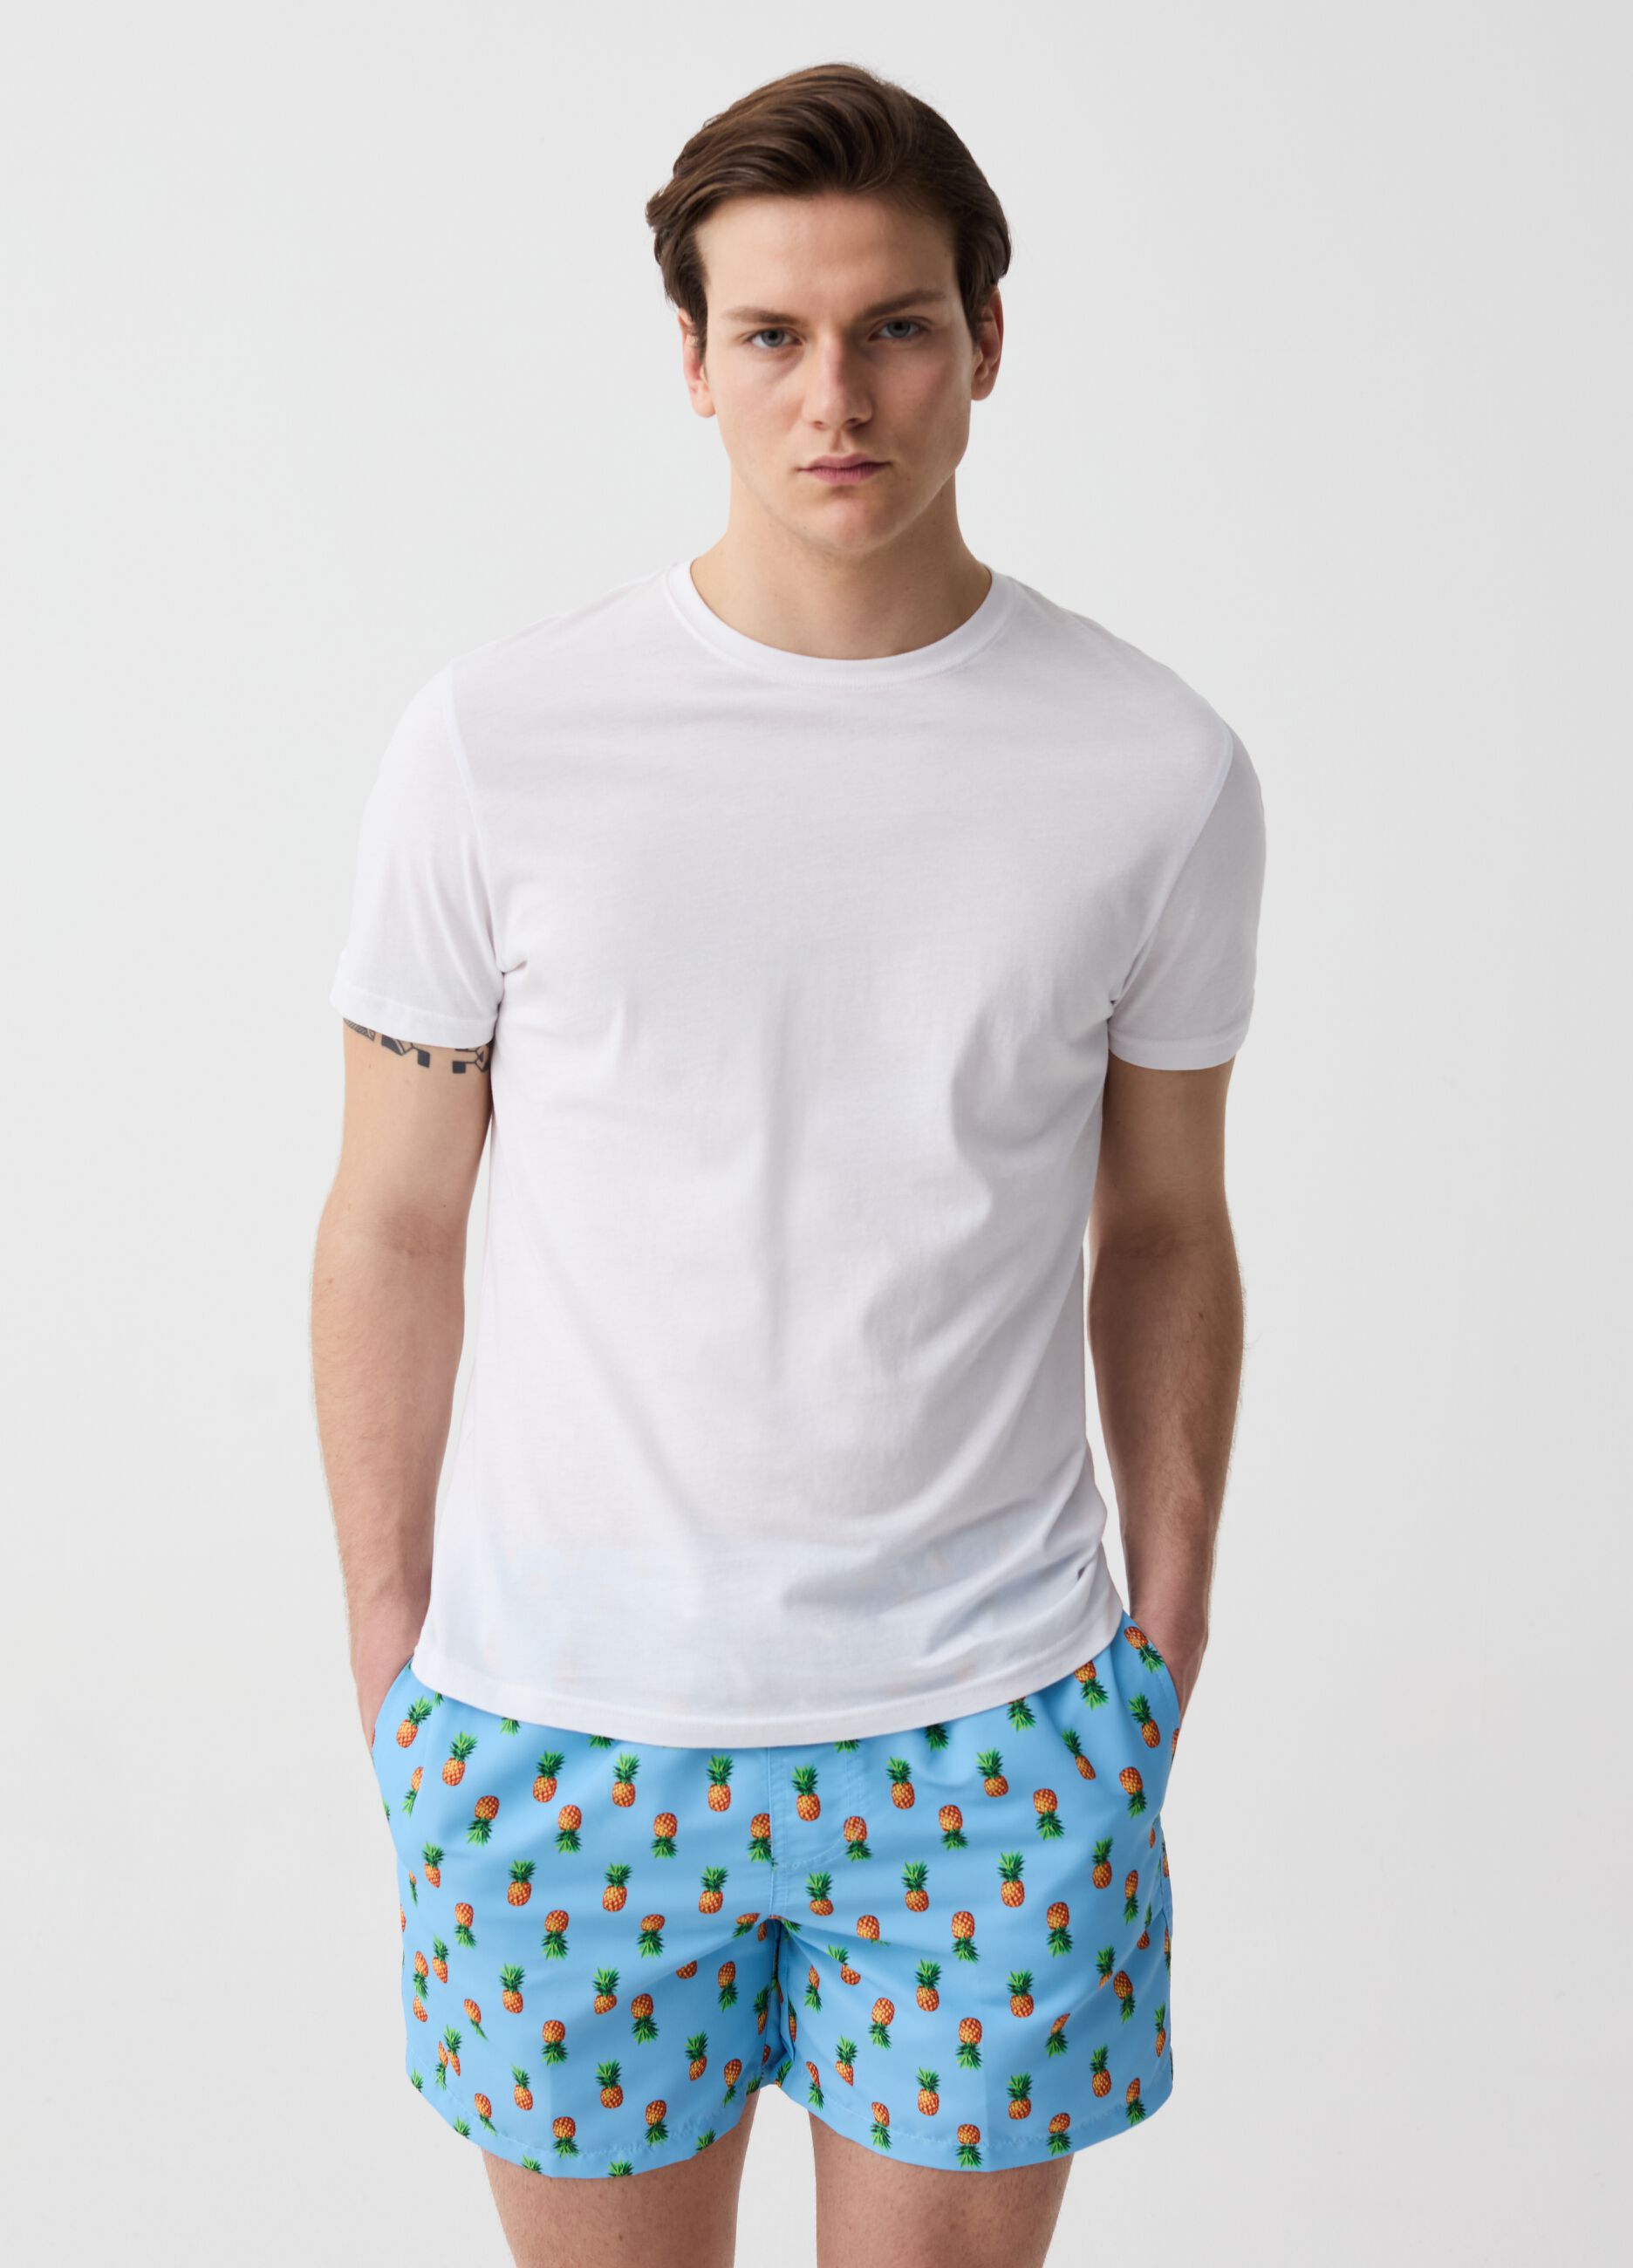 Swimming trunks with mini pineapples print